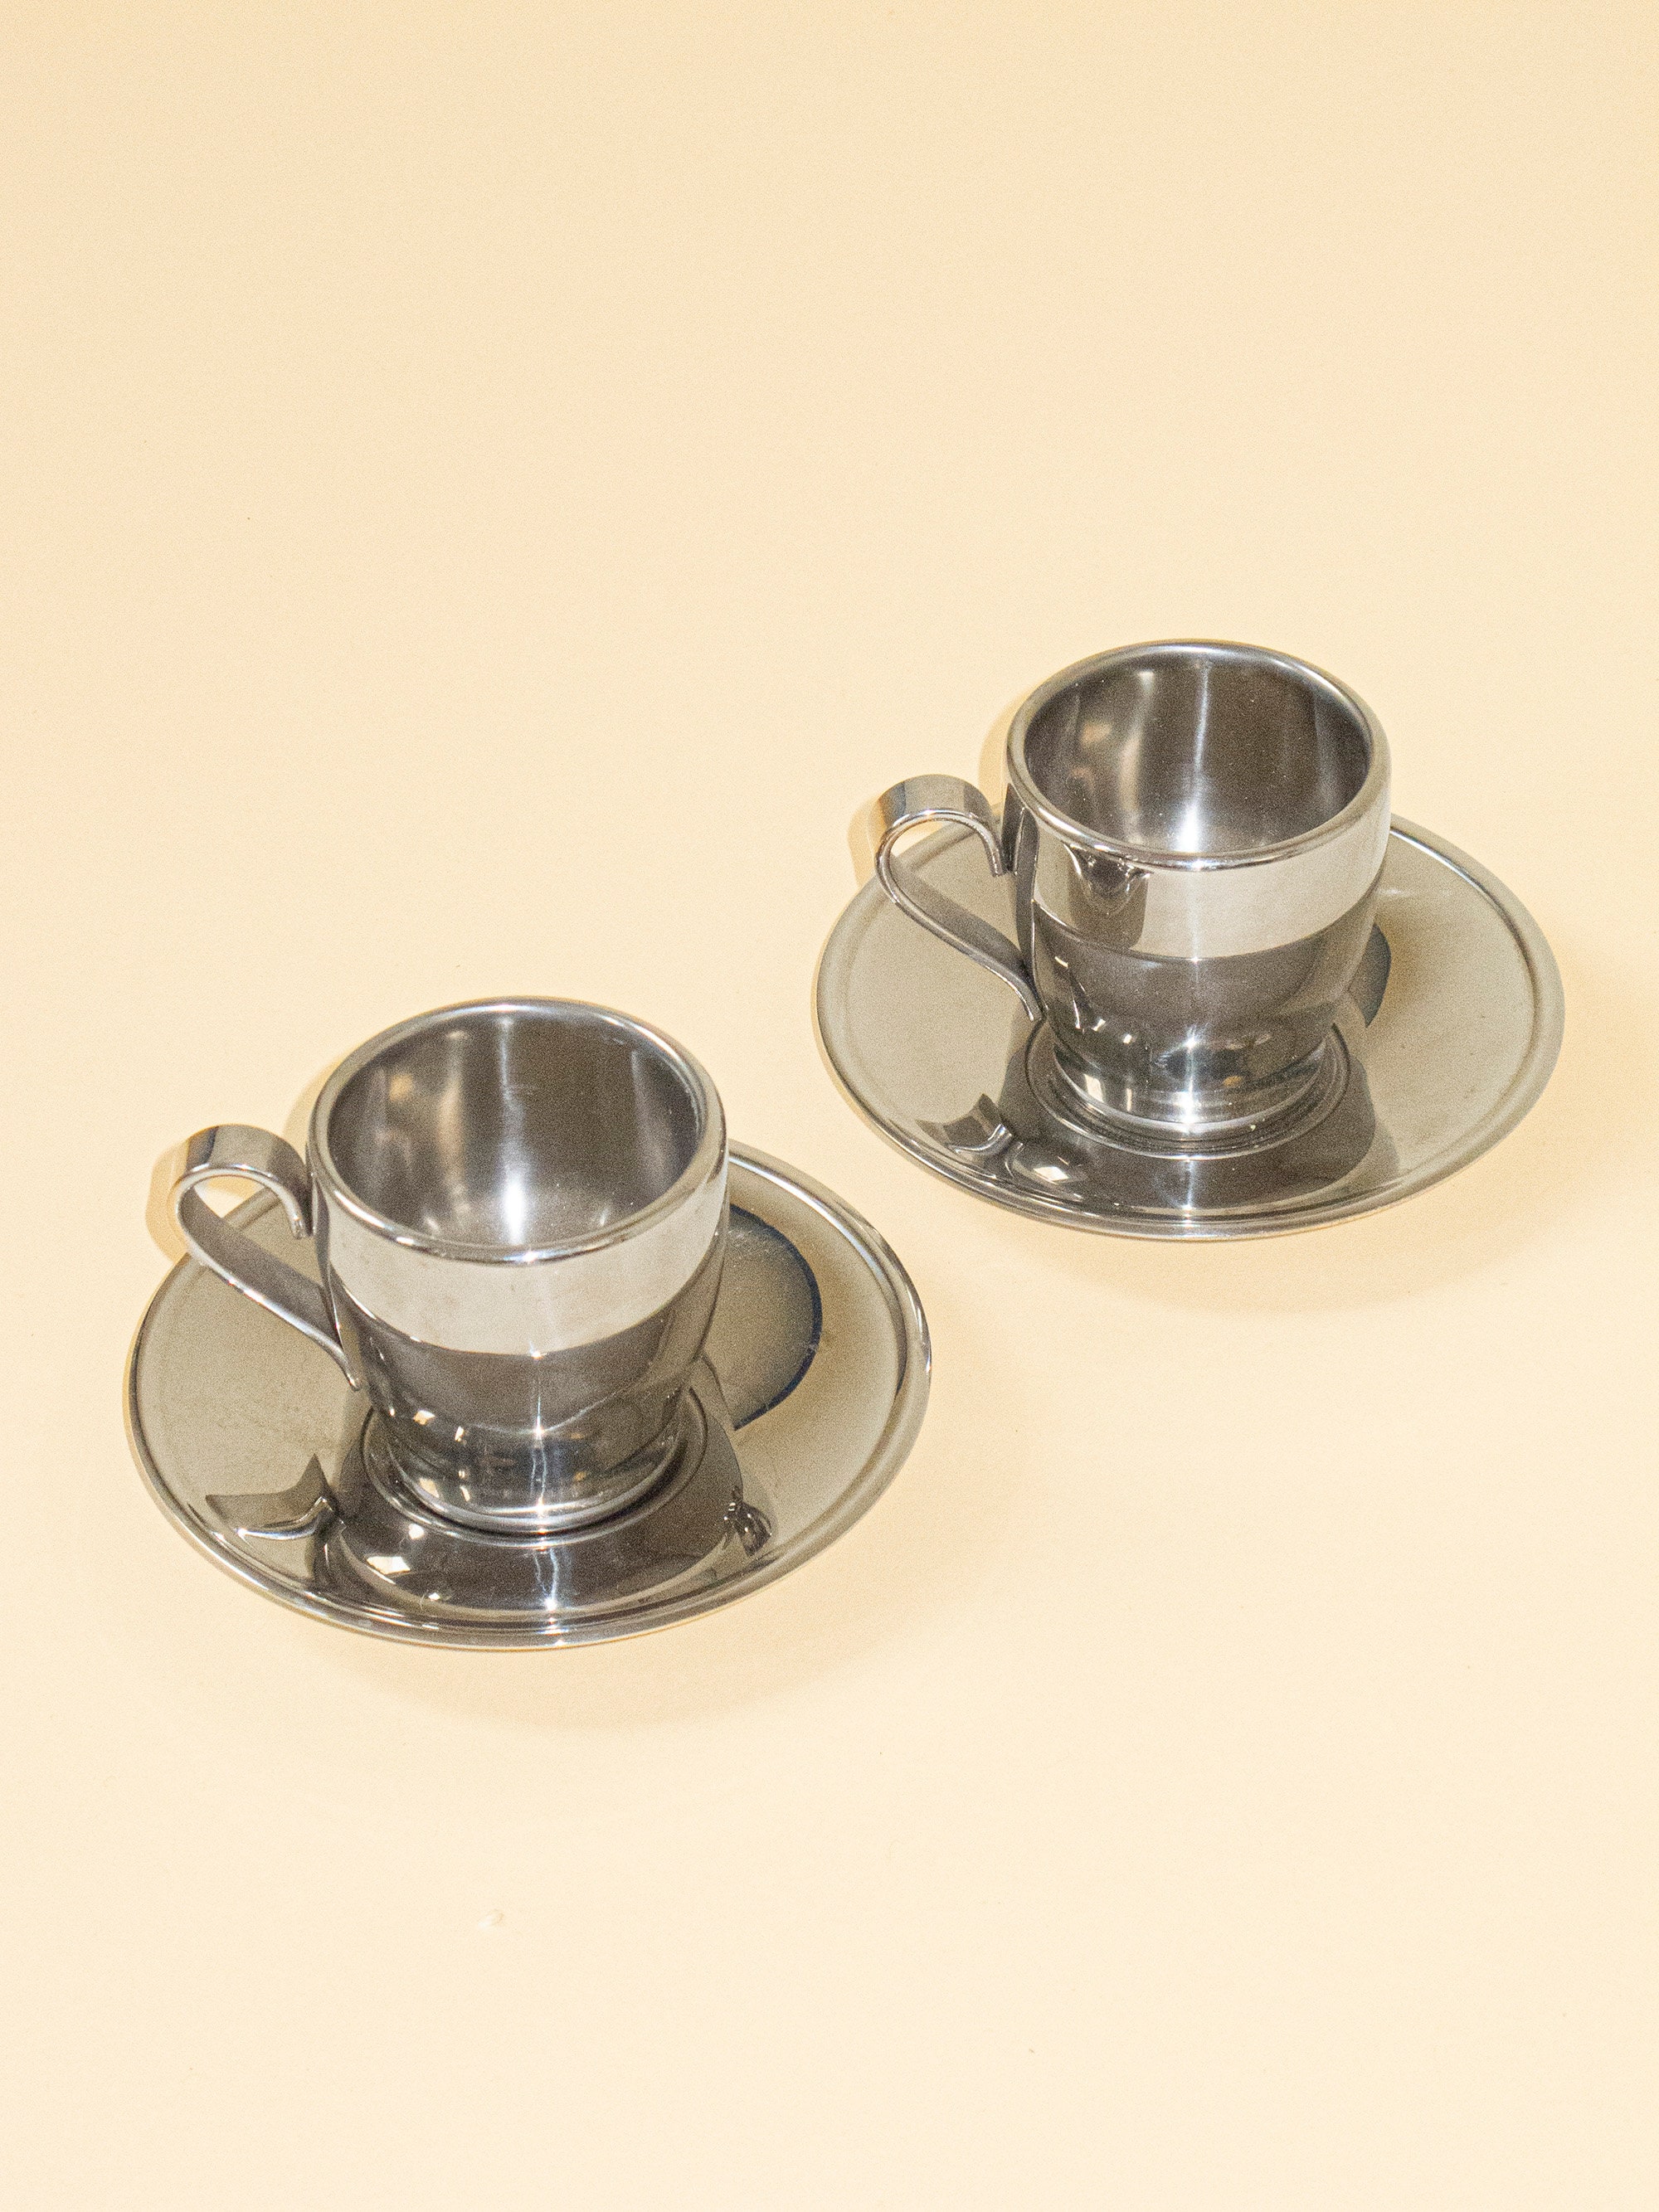 VEMI Inox Brass Espresso Cups Set of 4, Vintage Italian Stainless Steel and  Brass Demitasse Cups and Saucers, 2.25 -  Denmark